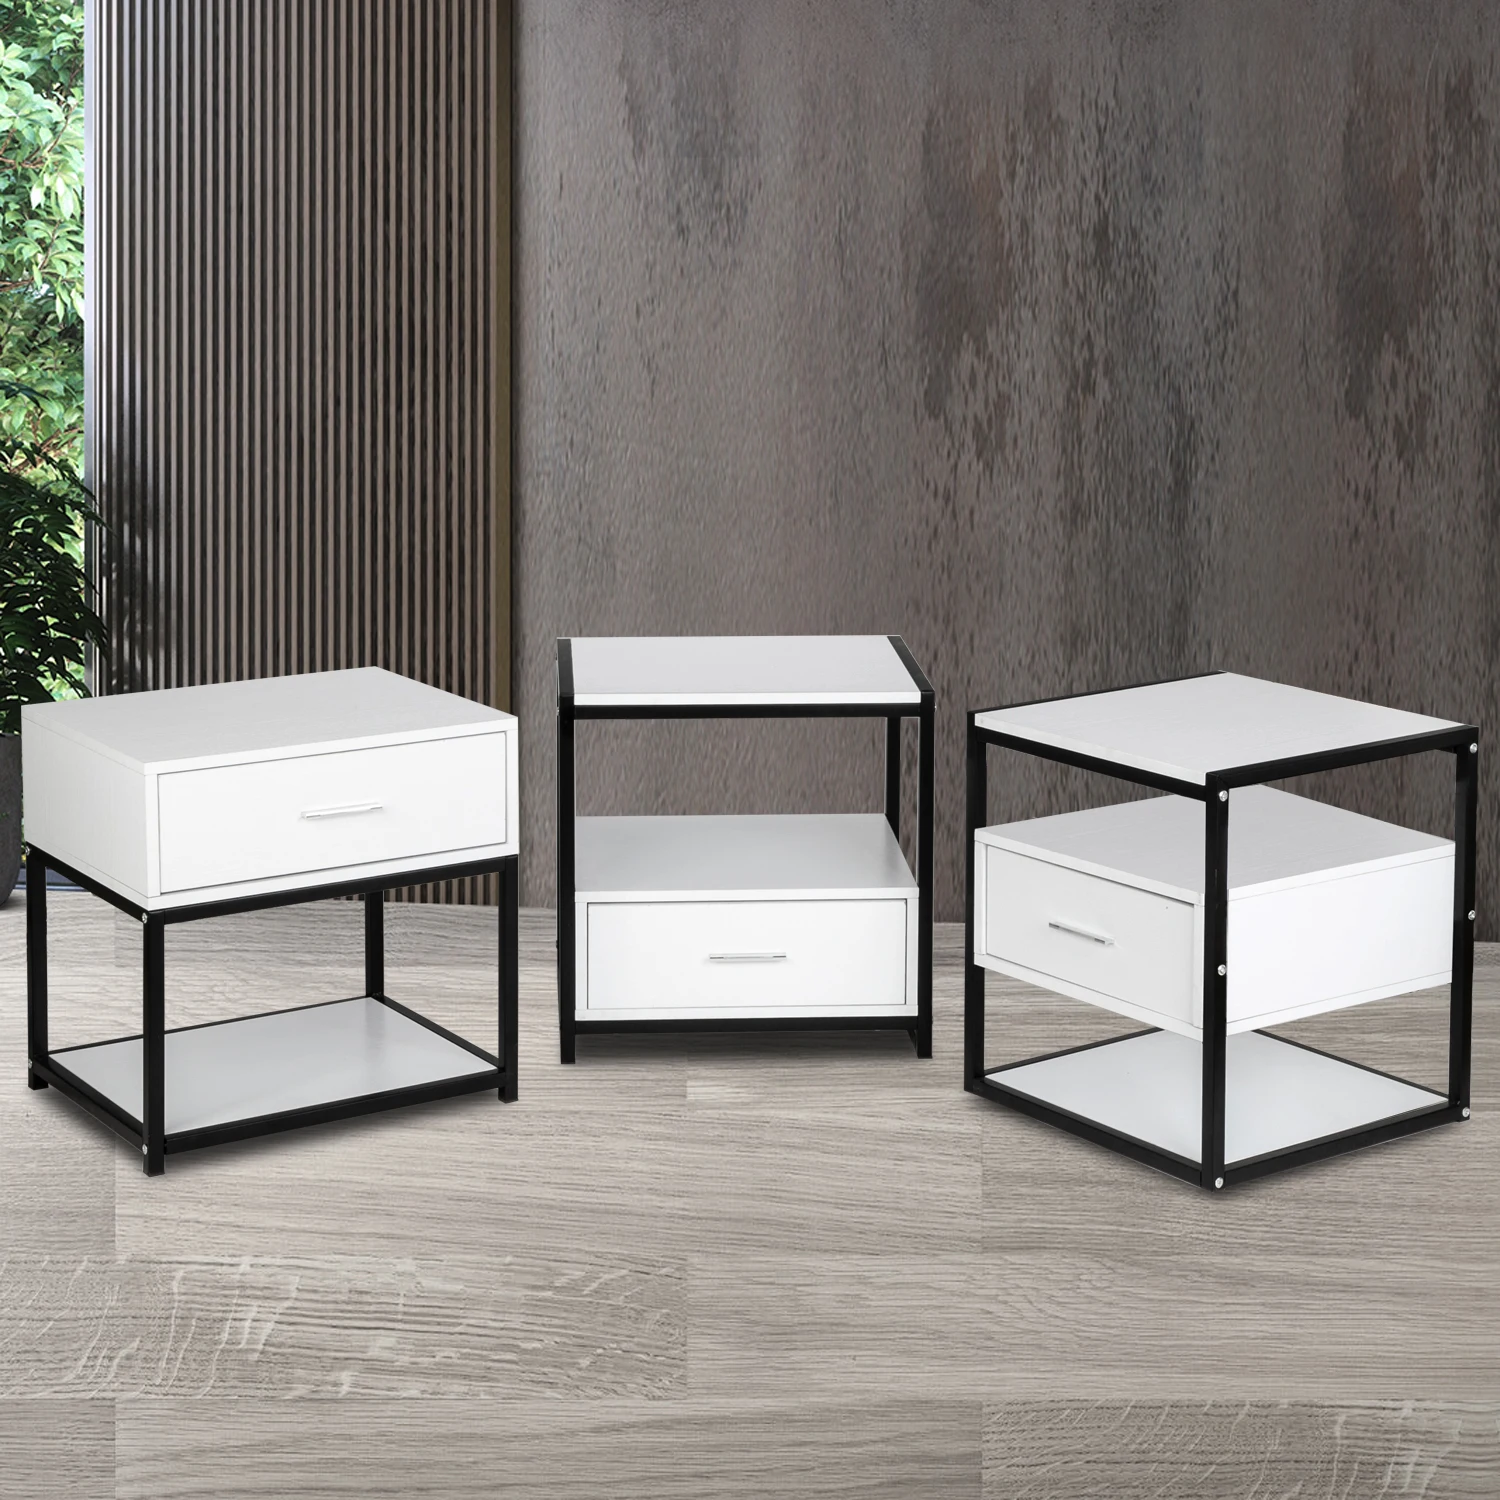 

Bedside Table Modern Simple Style Nightstand Particle Board&Steel Frame with 1 Drawer 45x45x50CM White[US-Stock]